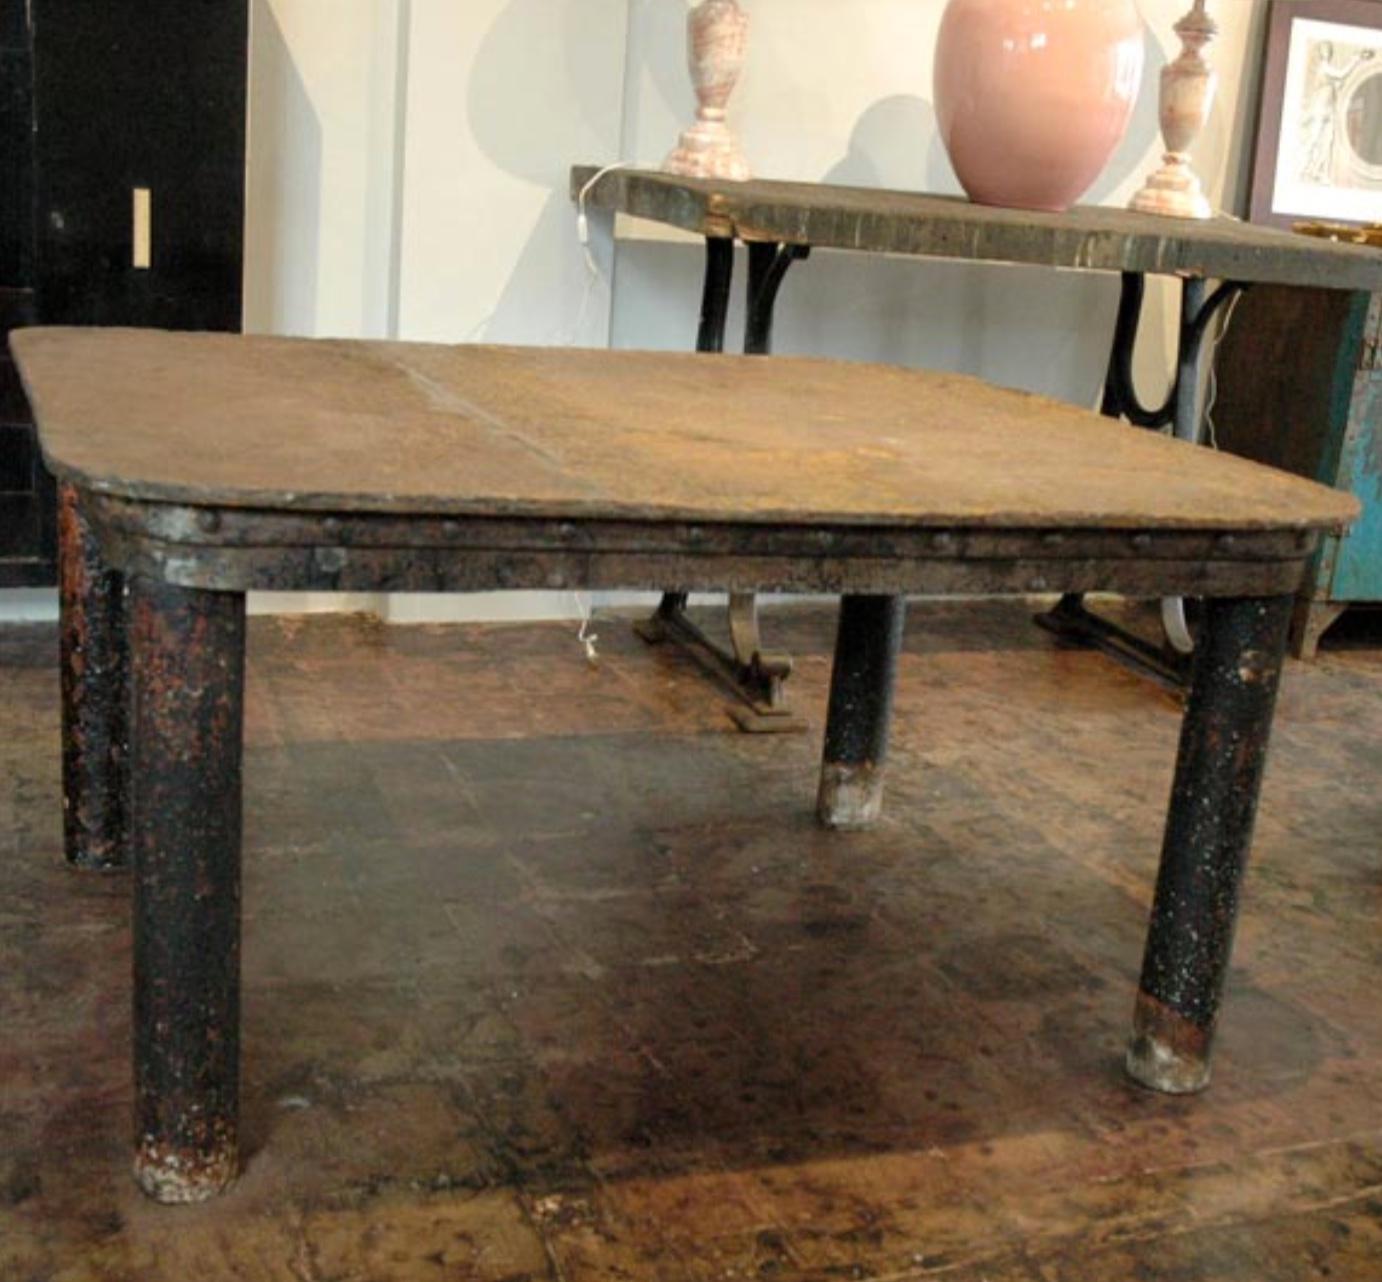 Amazing early 20th century solid patinated French industrial workshop table.

Beautiful aged / weathered / rough surface. Heavy solid oxidized steel. Soldered and riveted. 3/4 inch thick top.

Great as a desk with a large leather sous-main.